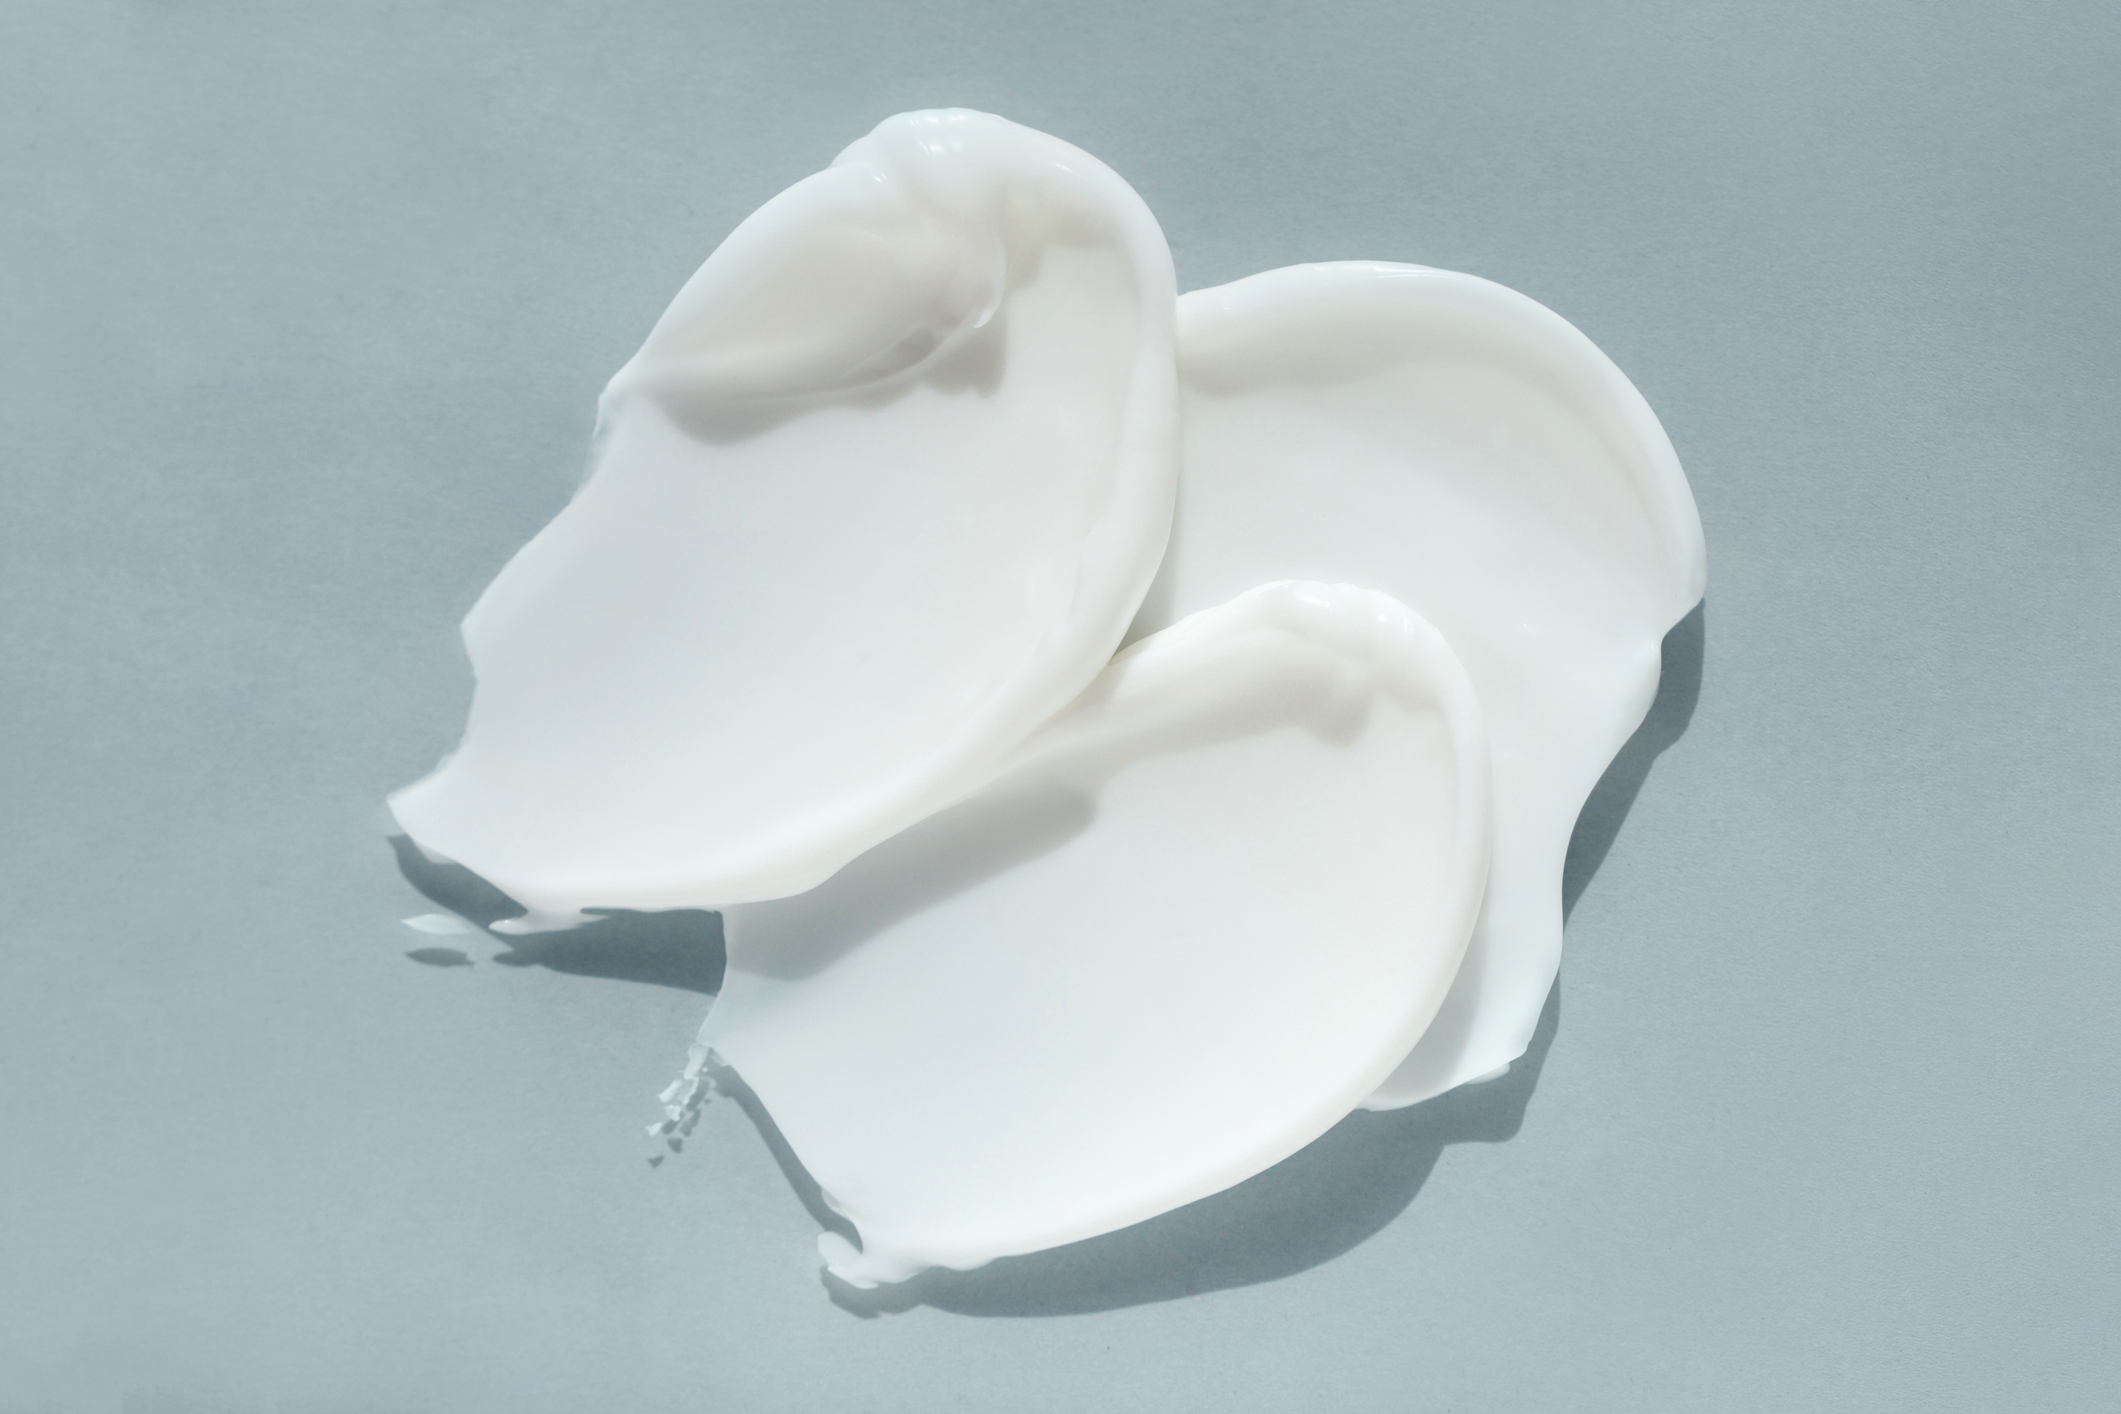 Smears of white yogurt or cream on light blue background. Flat lay style and close-up